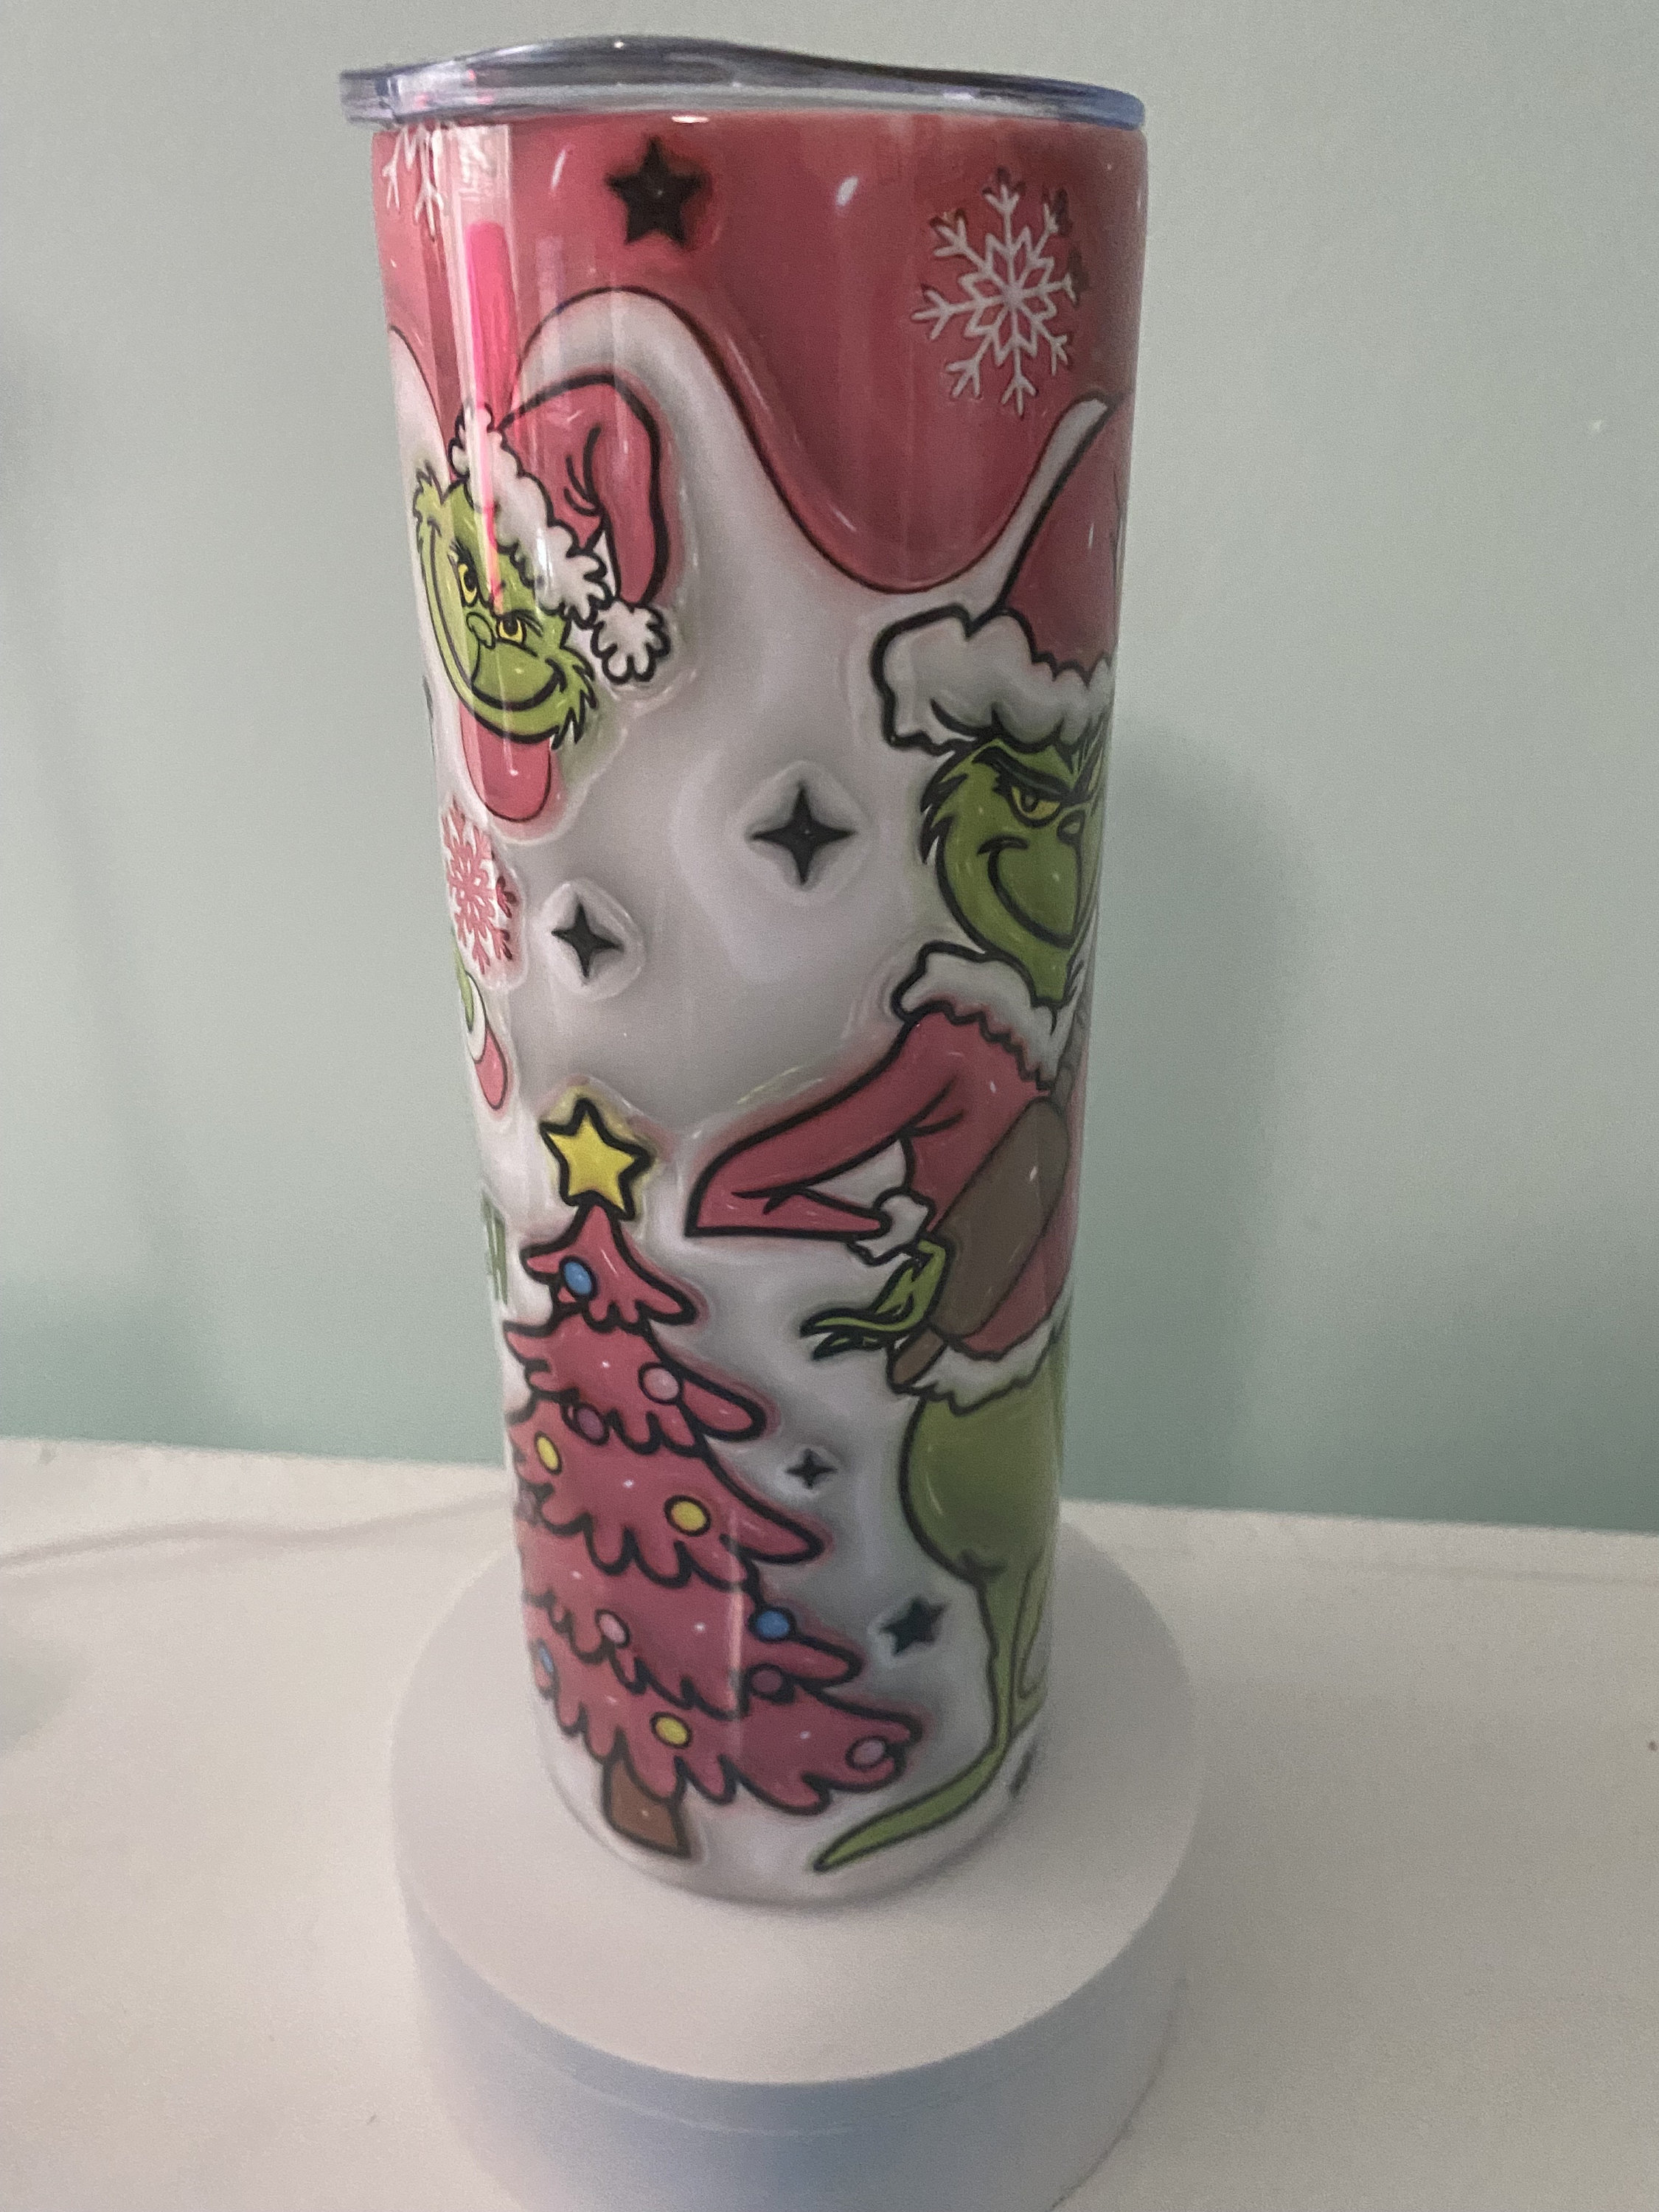 Grinch White Bougie on Outside Crossbody Bag w/ Stanley Cup 20oz Tumbler